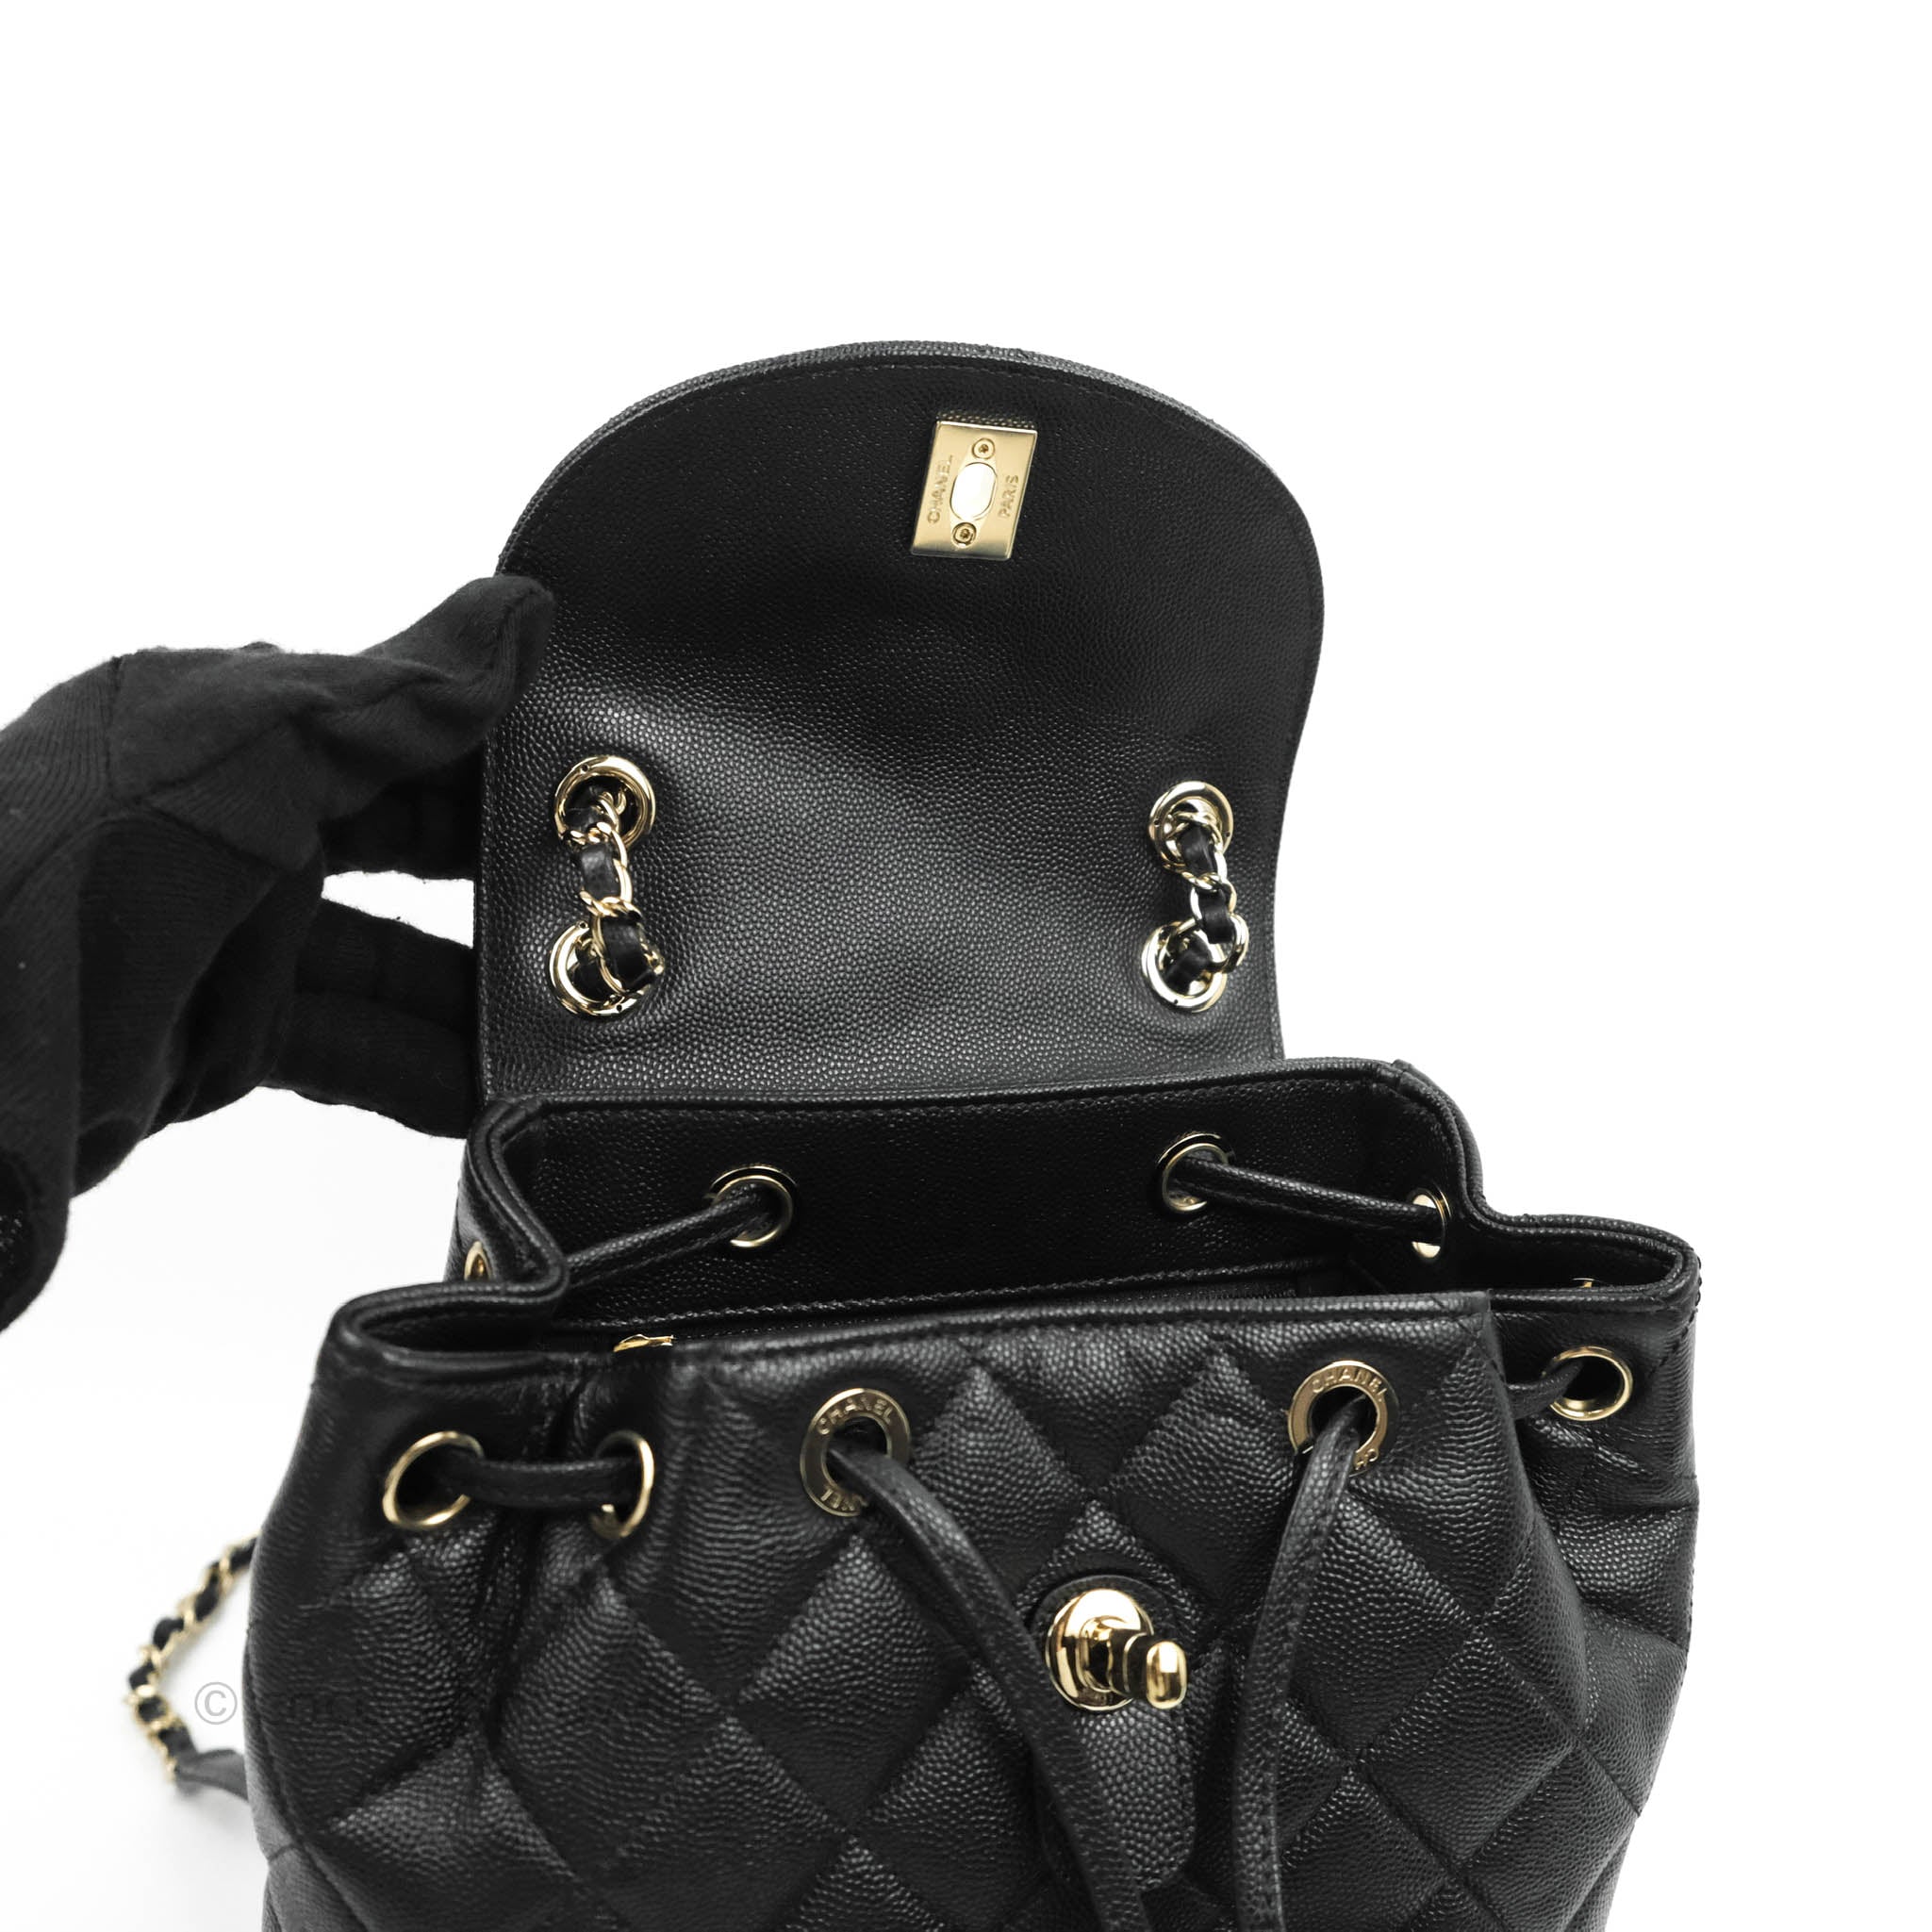 Backpack Chanel Black in Cotton - 25115851